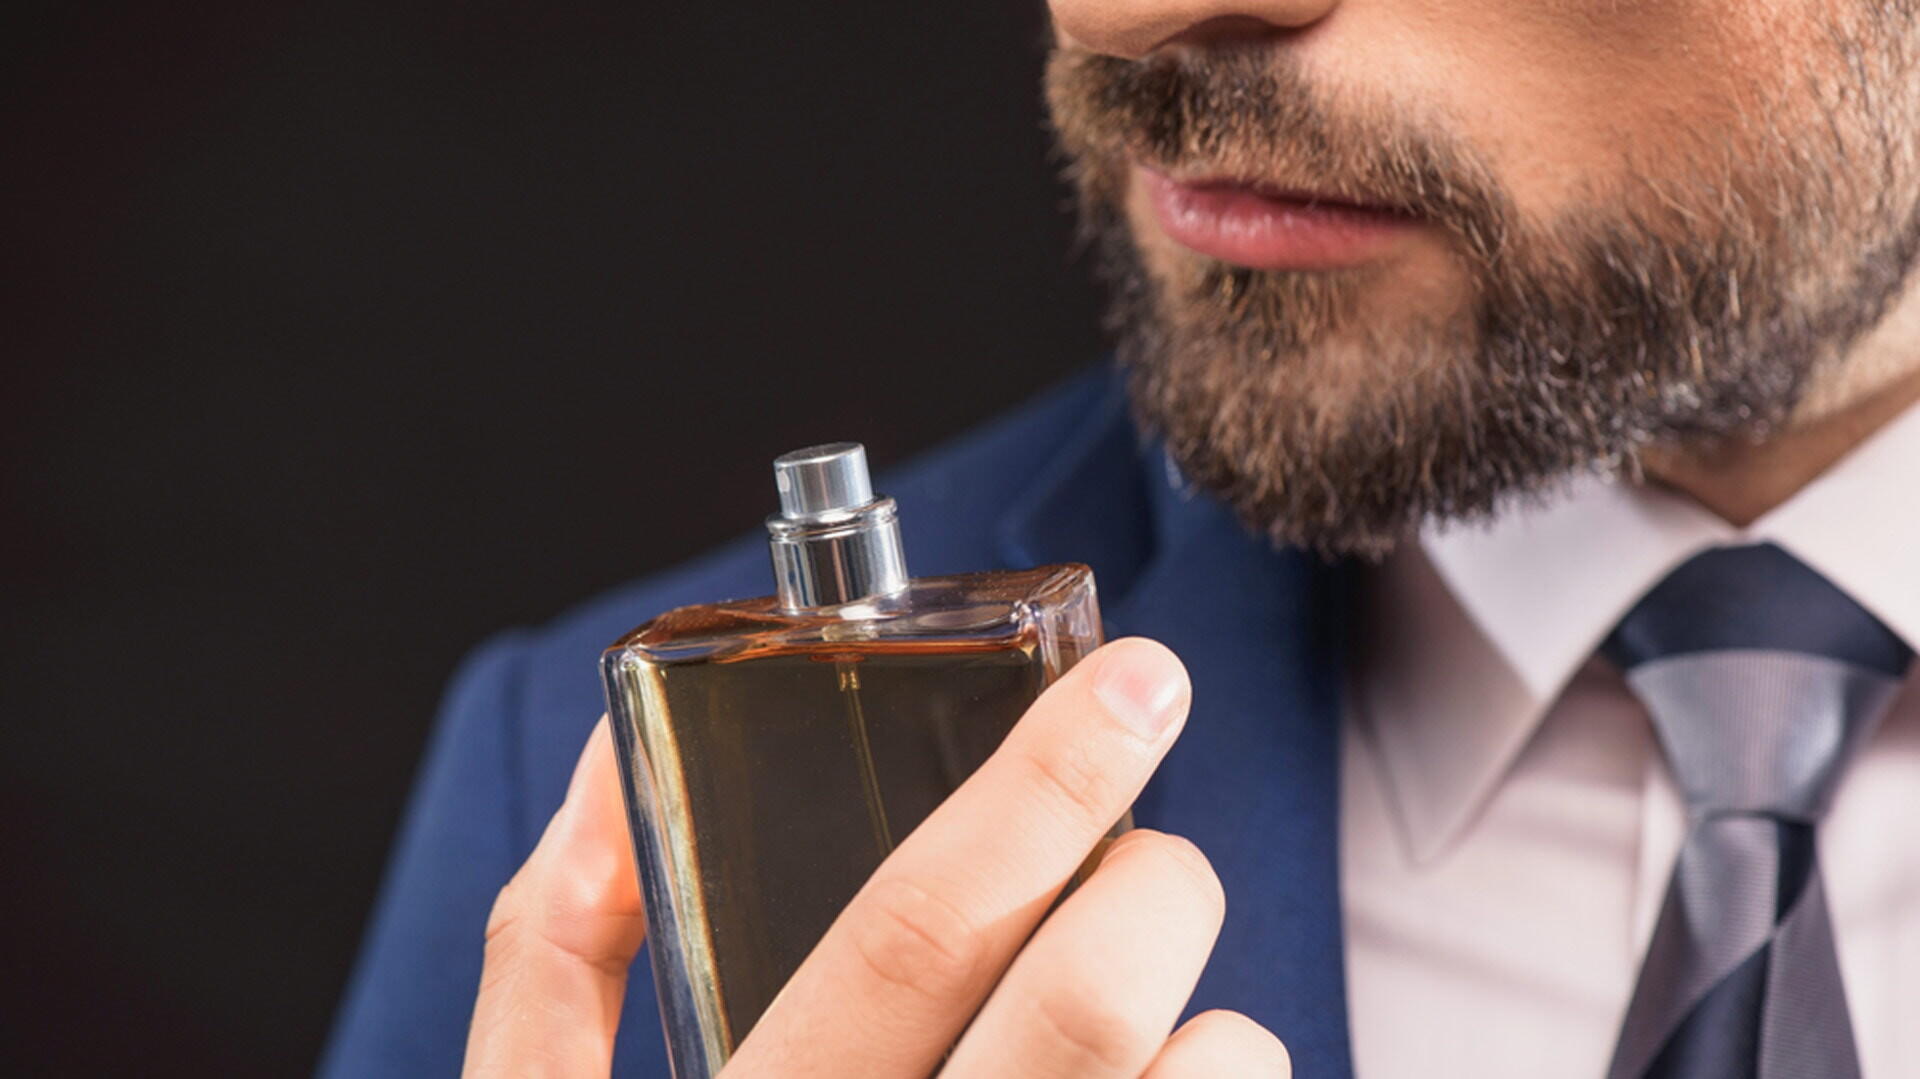 gq-native-man-smelling-perfume-scent-fragrance-min